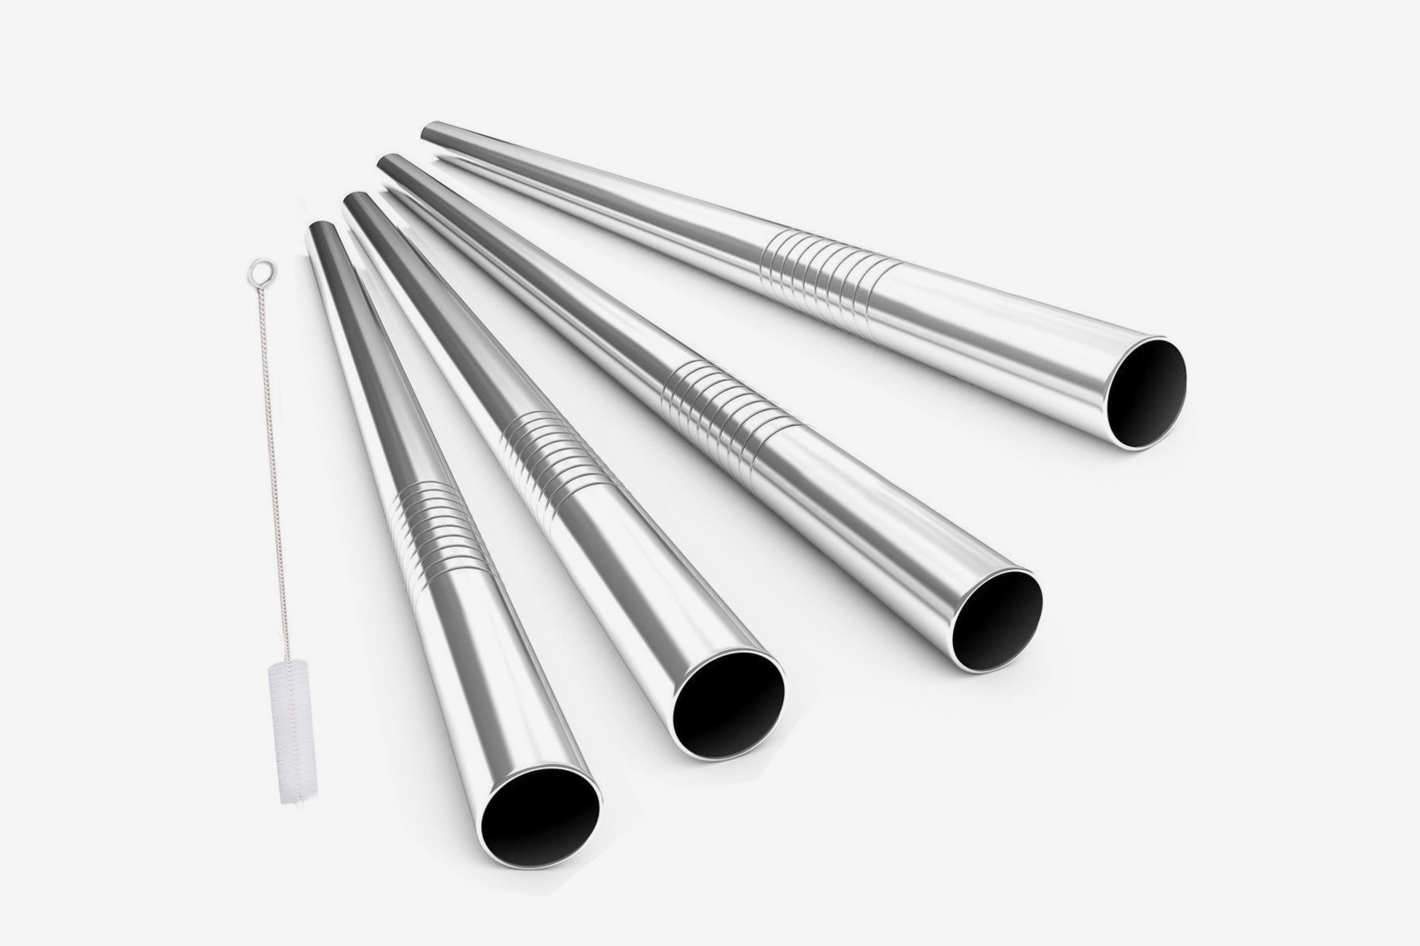 STAINLESS STEEL STRAWS - The clear champions of reusable straws